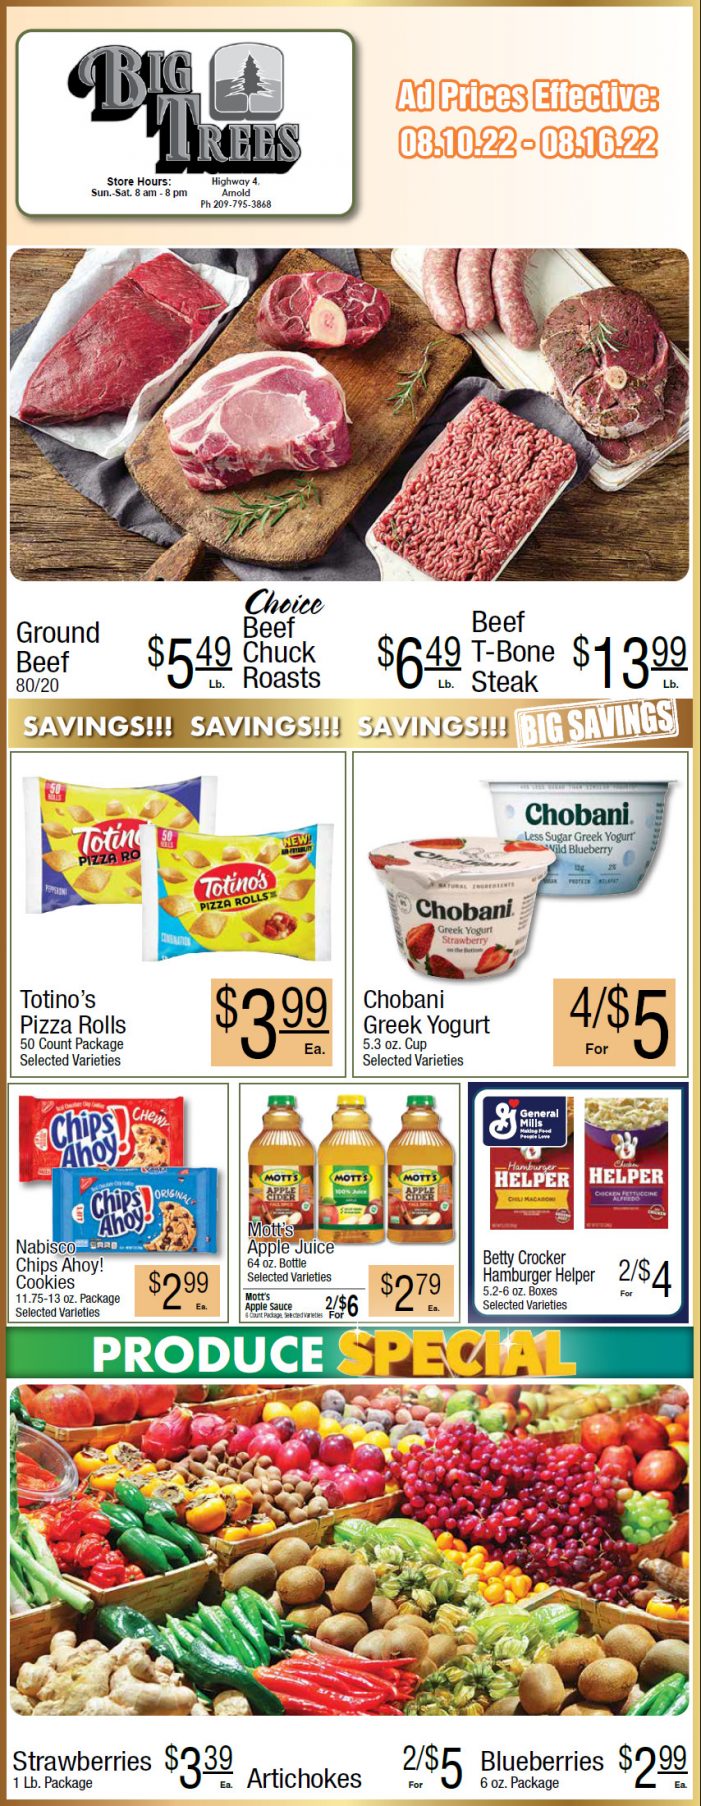 Big Trees Market Weekly Ad & Grocery Specials August 10 – August 16!  Shop Local & Save for Summer!!